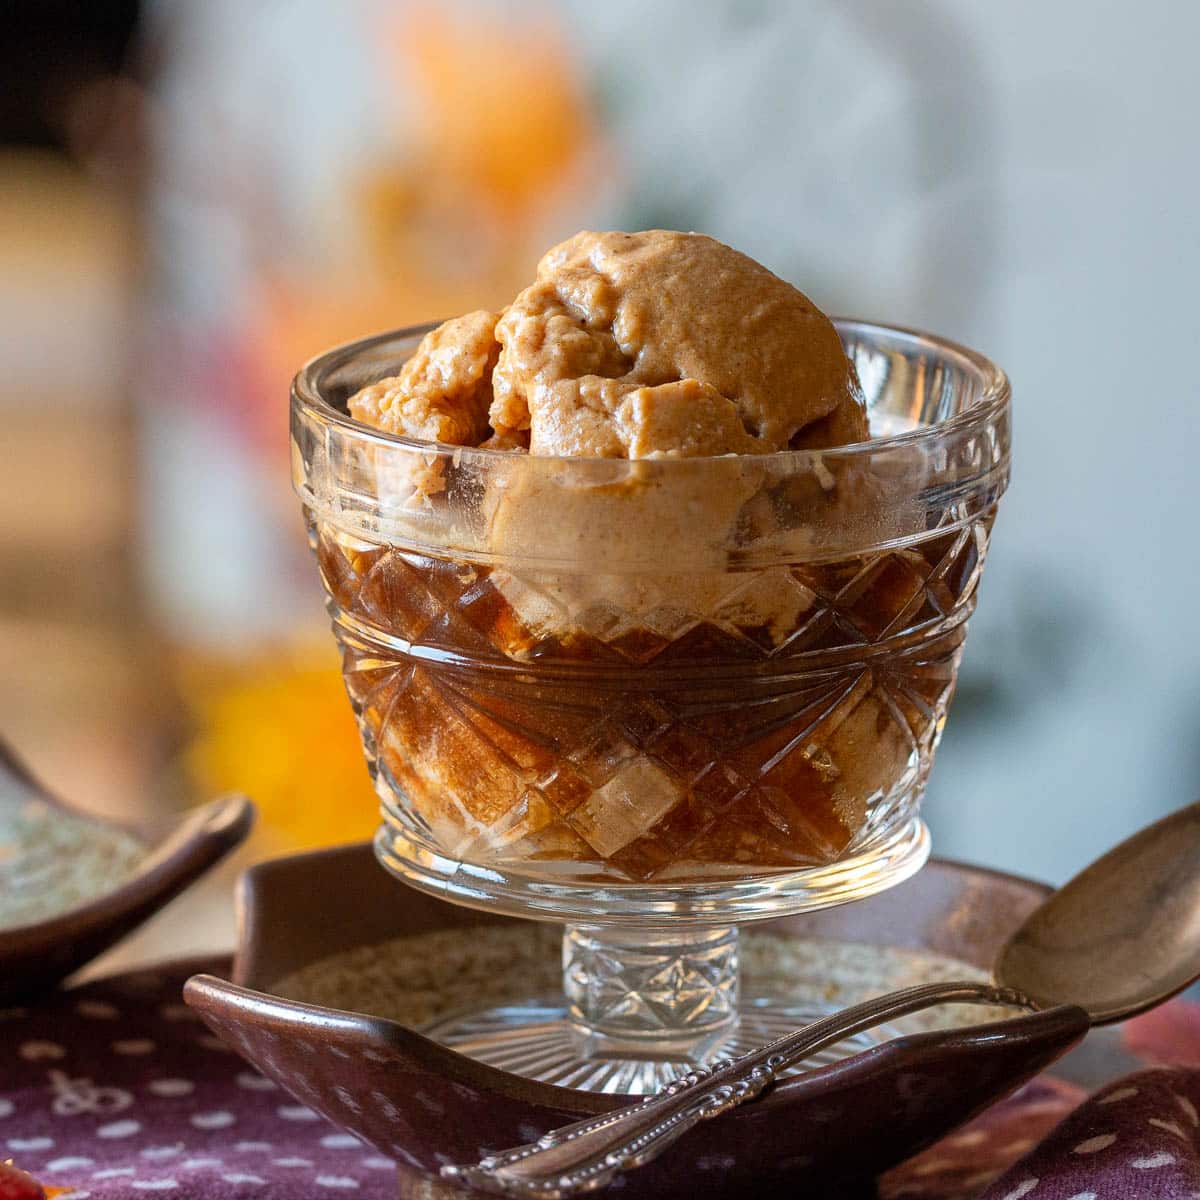 Dairy free pumpkin ice cream affogato without any garnishes in a clear vintage glass.